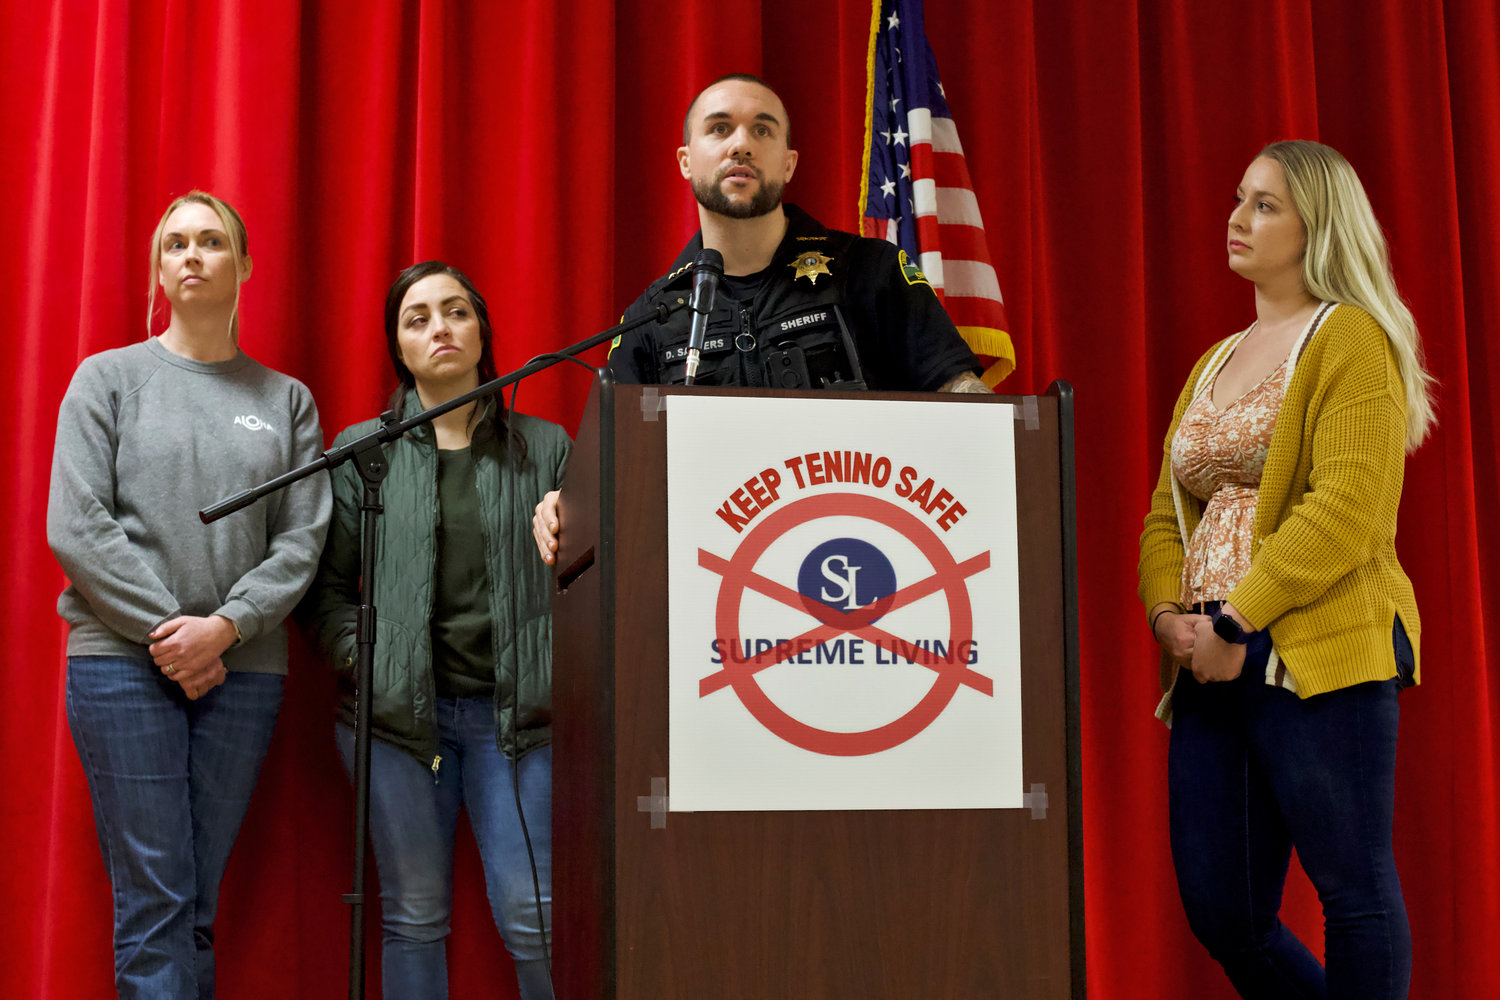 From left, Sarah Fox, Kerri Jeter, Thurston County Sheriff Derek Sanders and Kendall Tutlle answer questions during a community meeting at Tenino High School earlier this month.